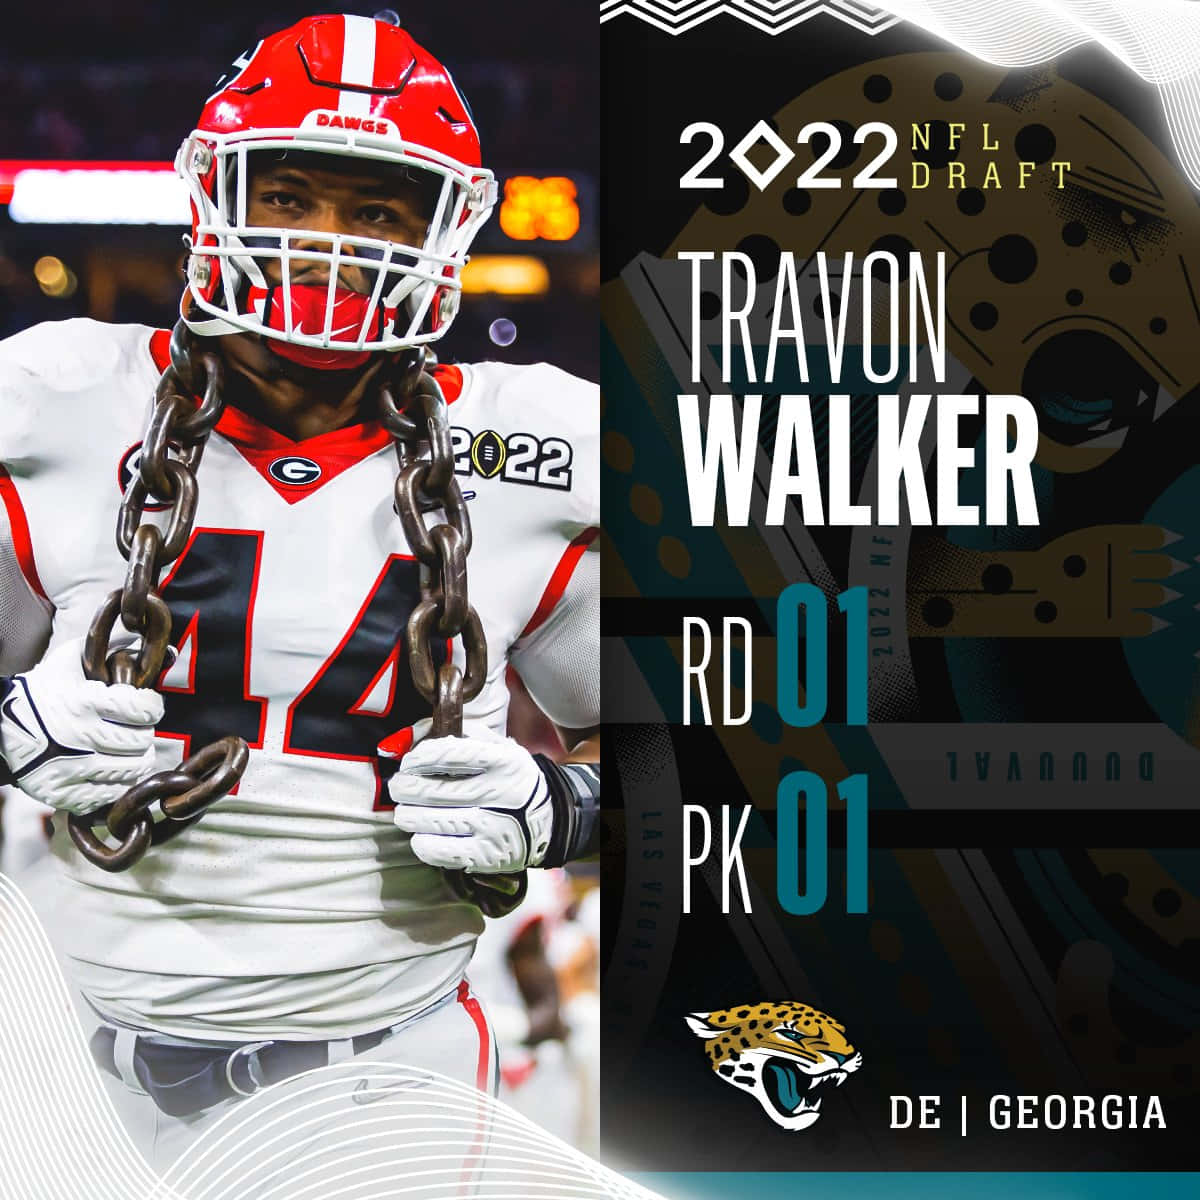 Travonwalker 2022 Nfl Draft Poster Would Be Translated To 